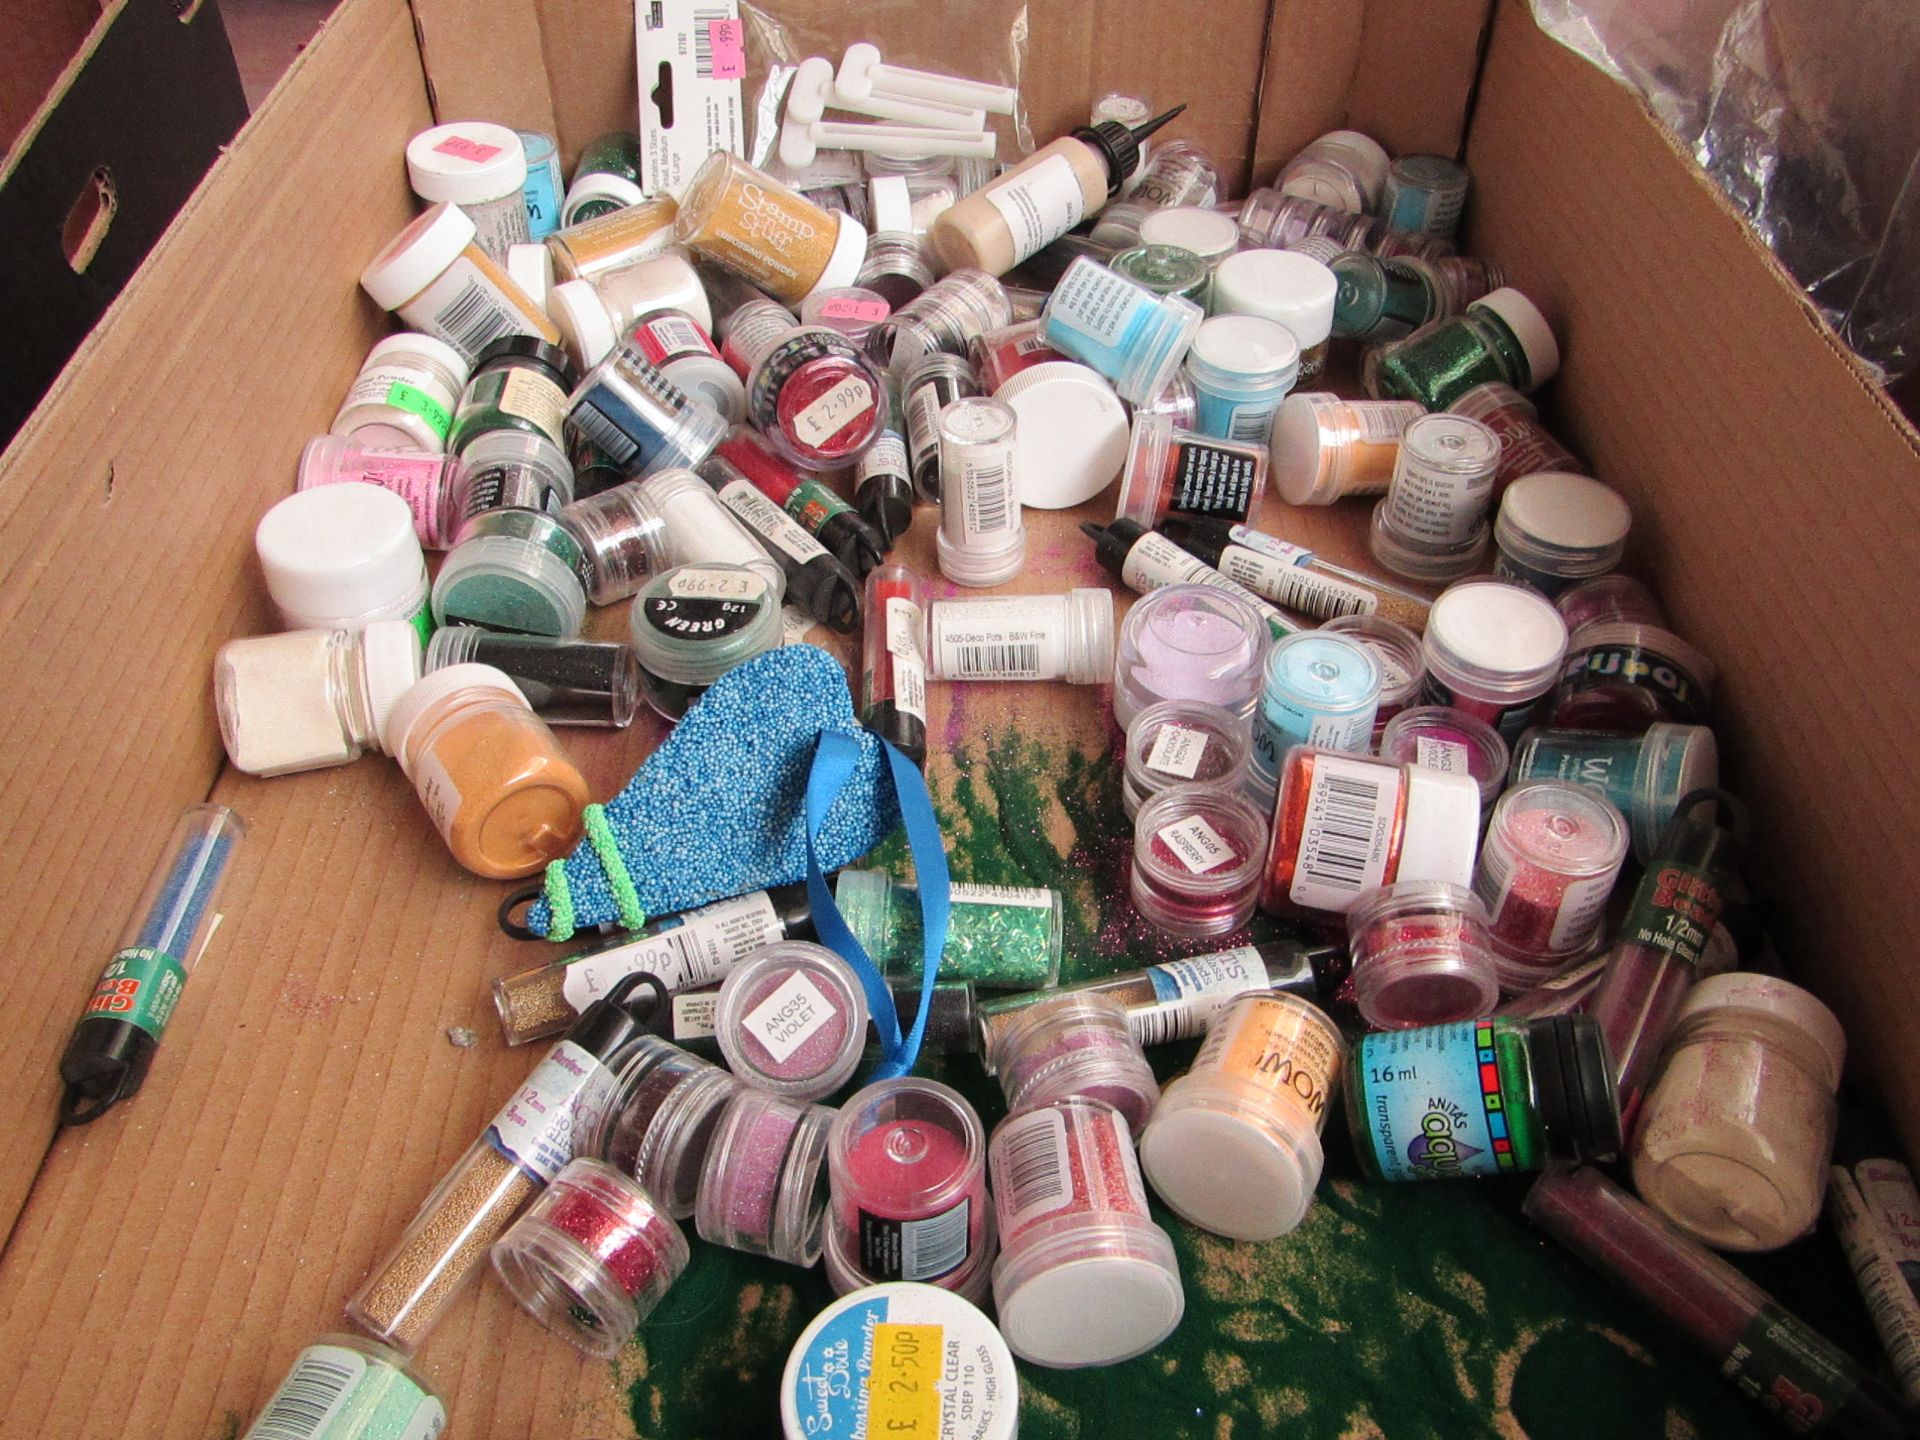 10 x various Pots of Crafting/Project Embossing Powders RRP £2.50 - £4.99 new randomly picked see